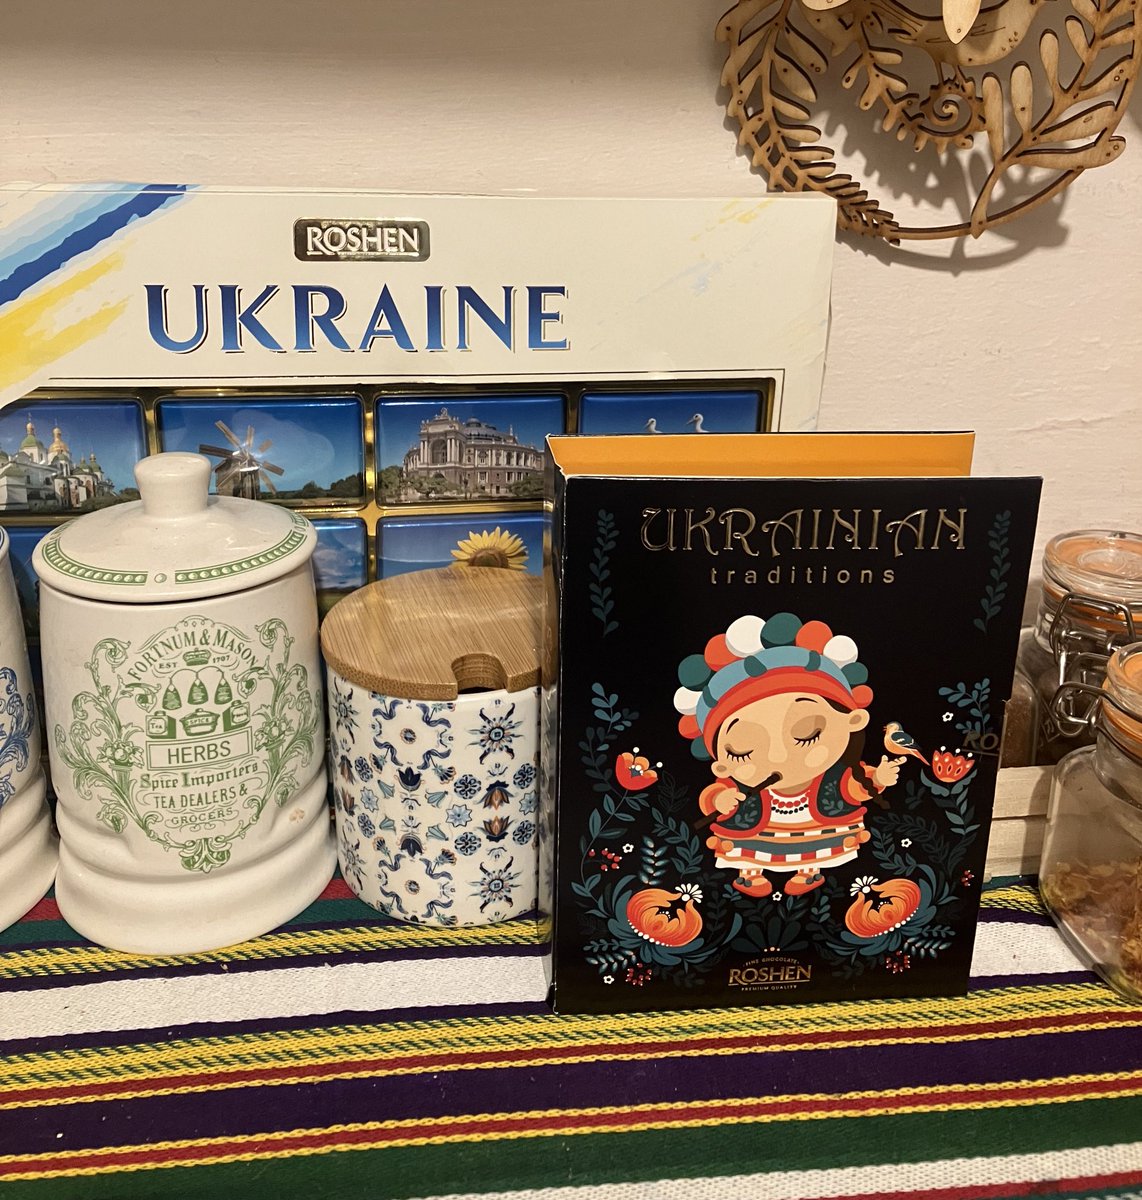 Cracked (it’s been a long week) and opened the Ukrainian chocolates I bought in Odesa